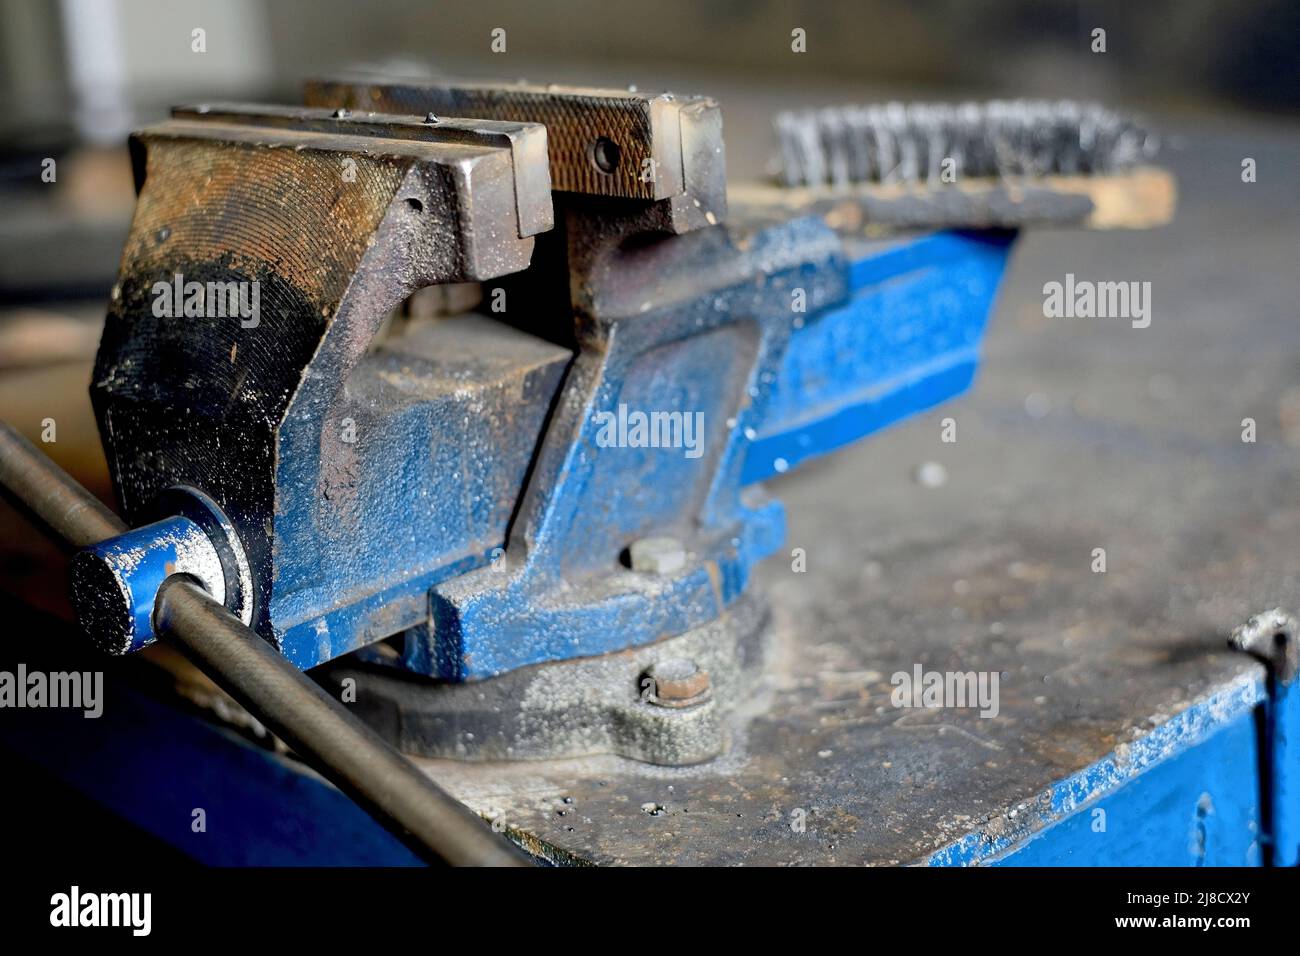 Metal workbench with viscle for clamping parts. View of workplace in workshop. Order and cleanliness in workplace. Labor protection. Background Stock Photo